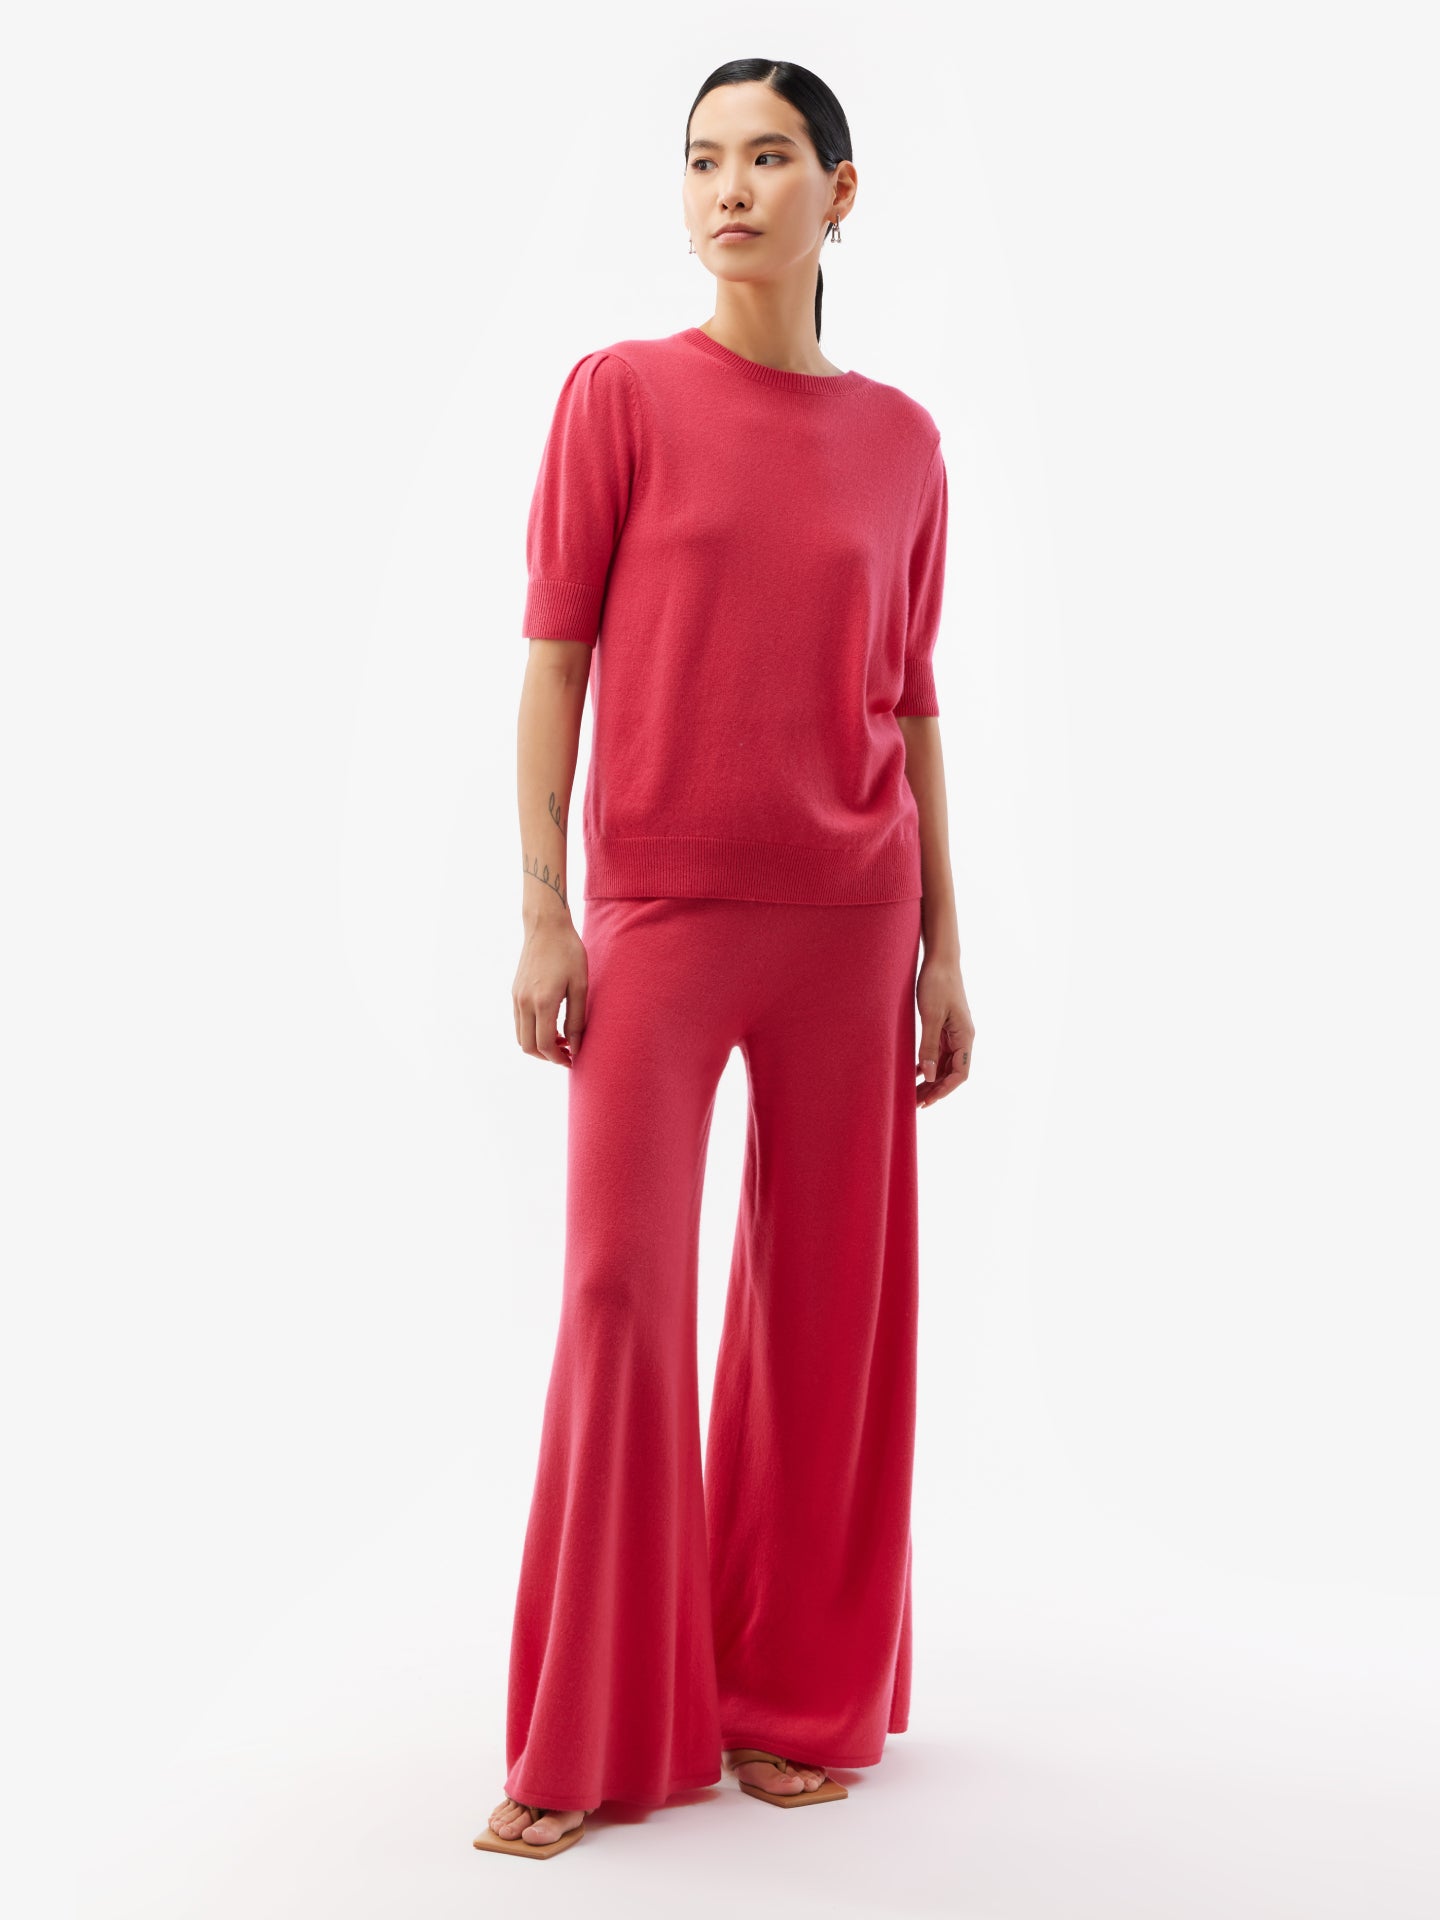 Women's Cashmere Puff Sleeve Top Red - Gobi Cashmere